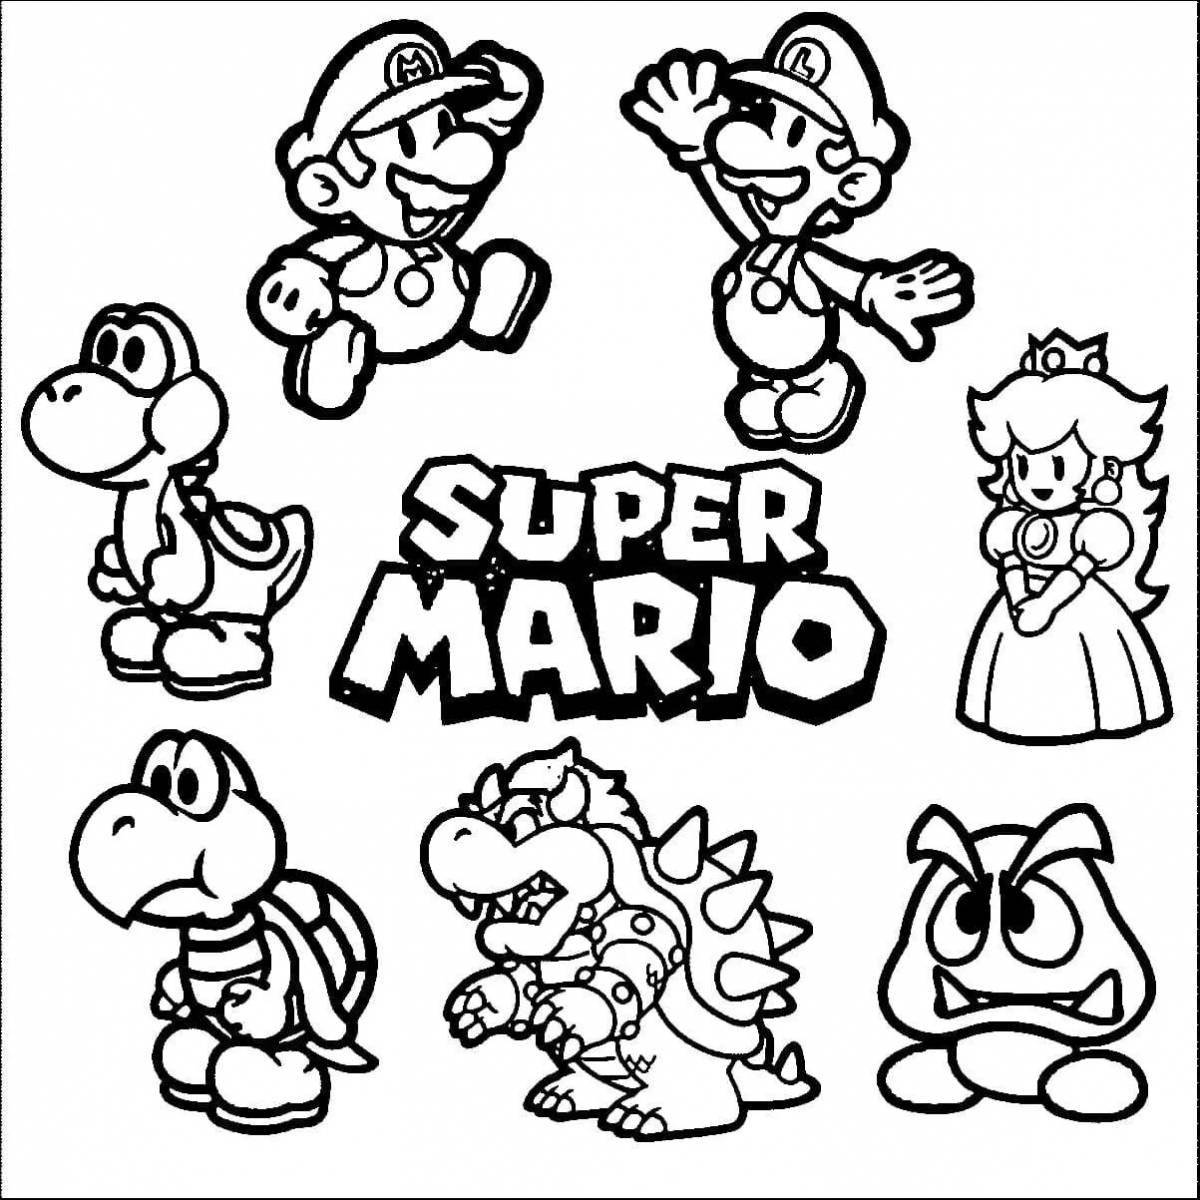 Coloured Mad Mario by Numbers Coloring Pages